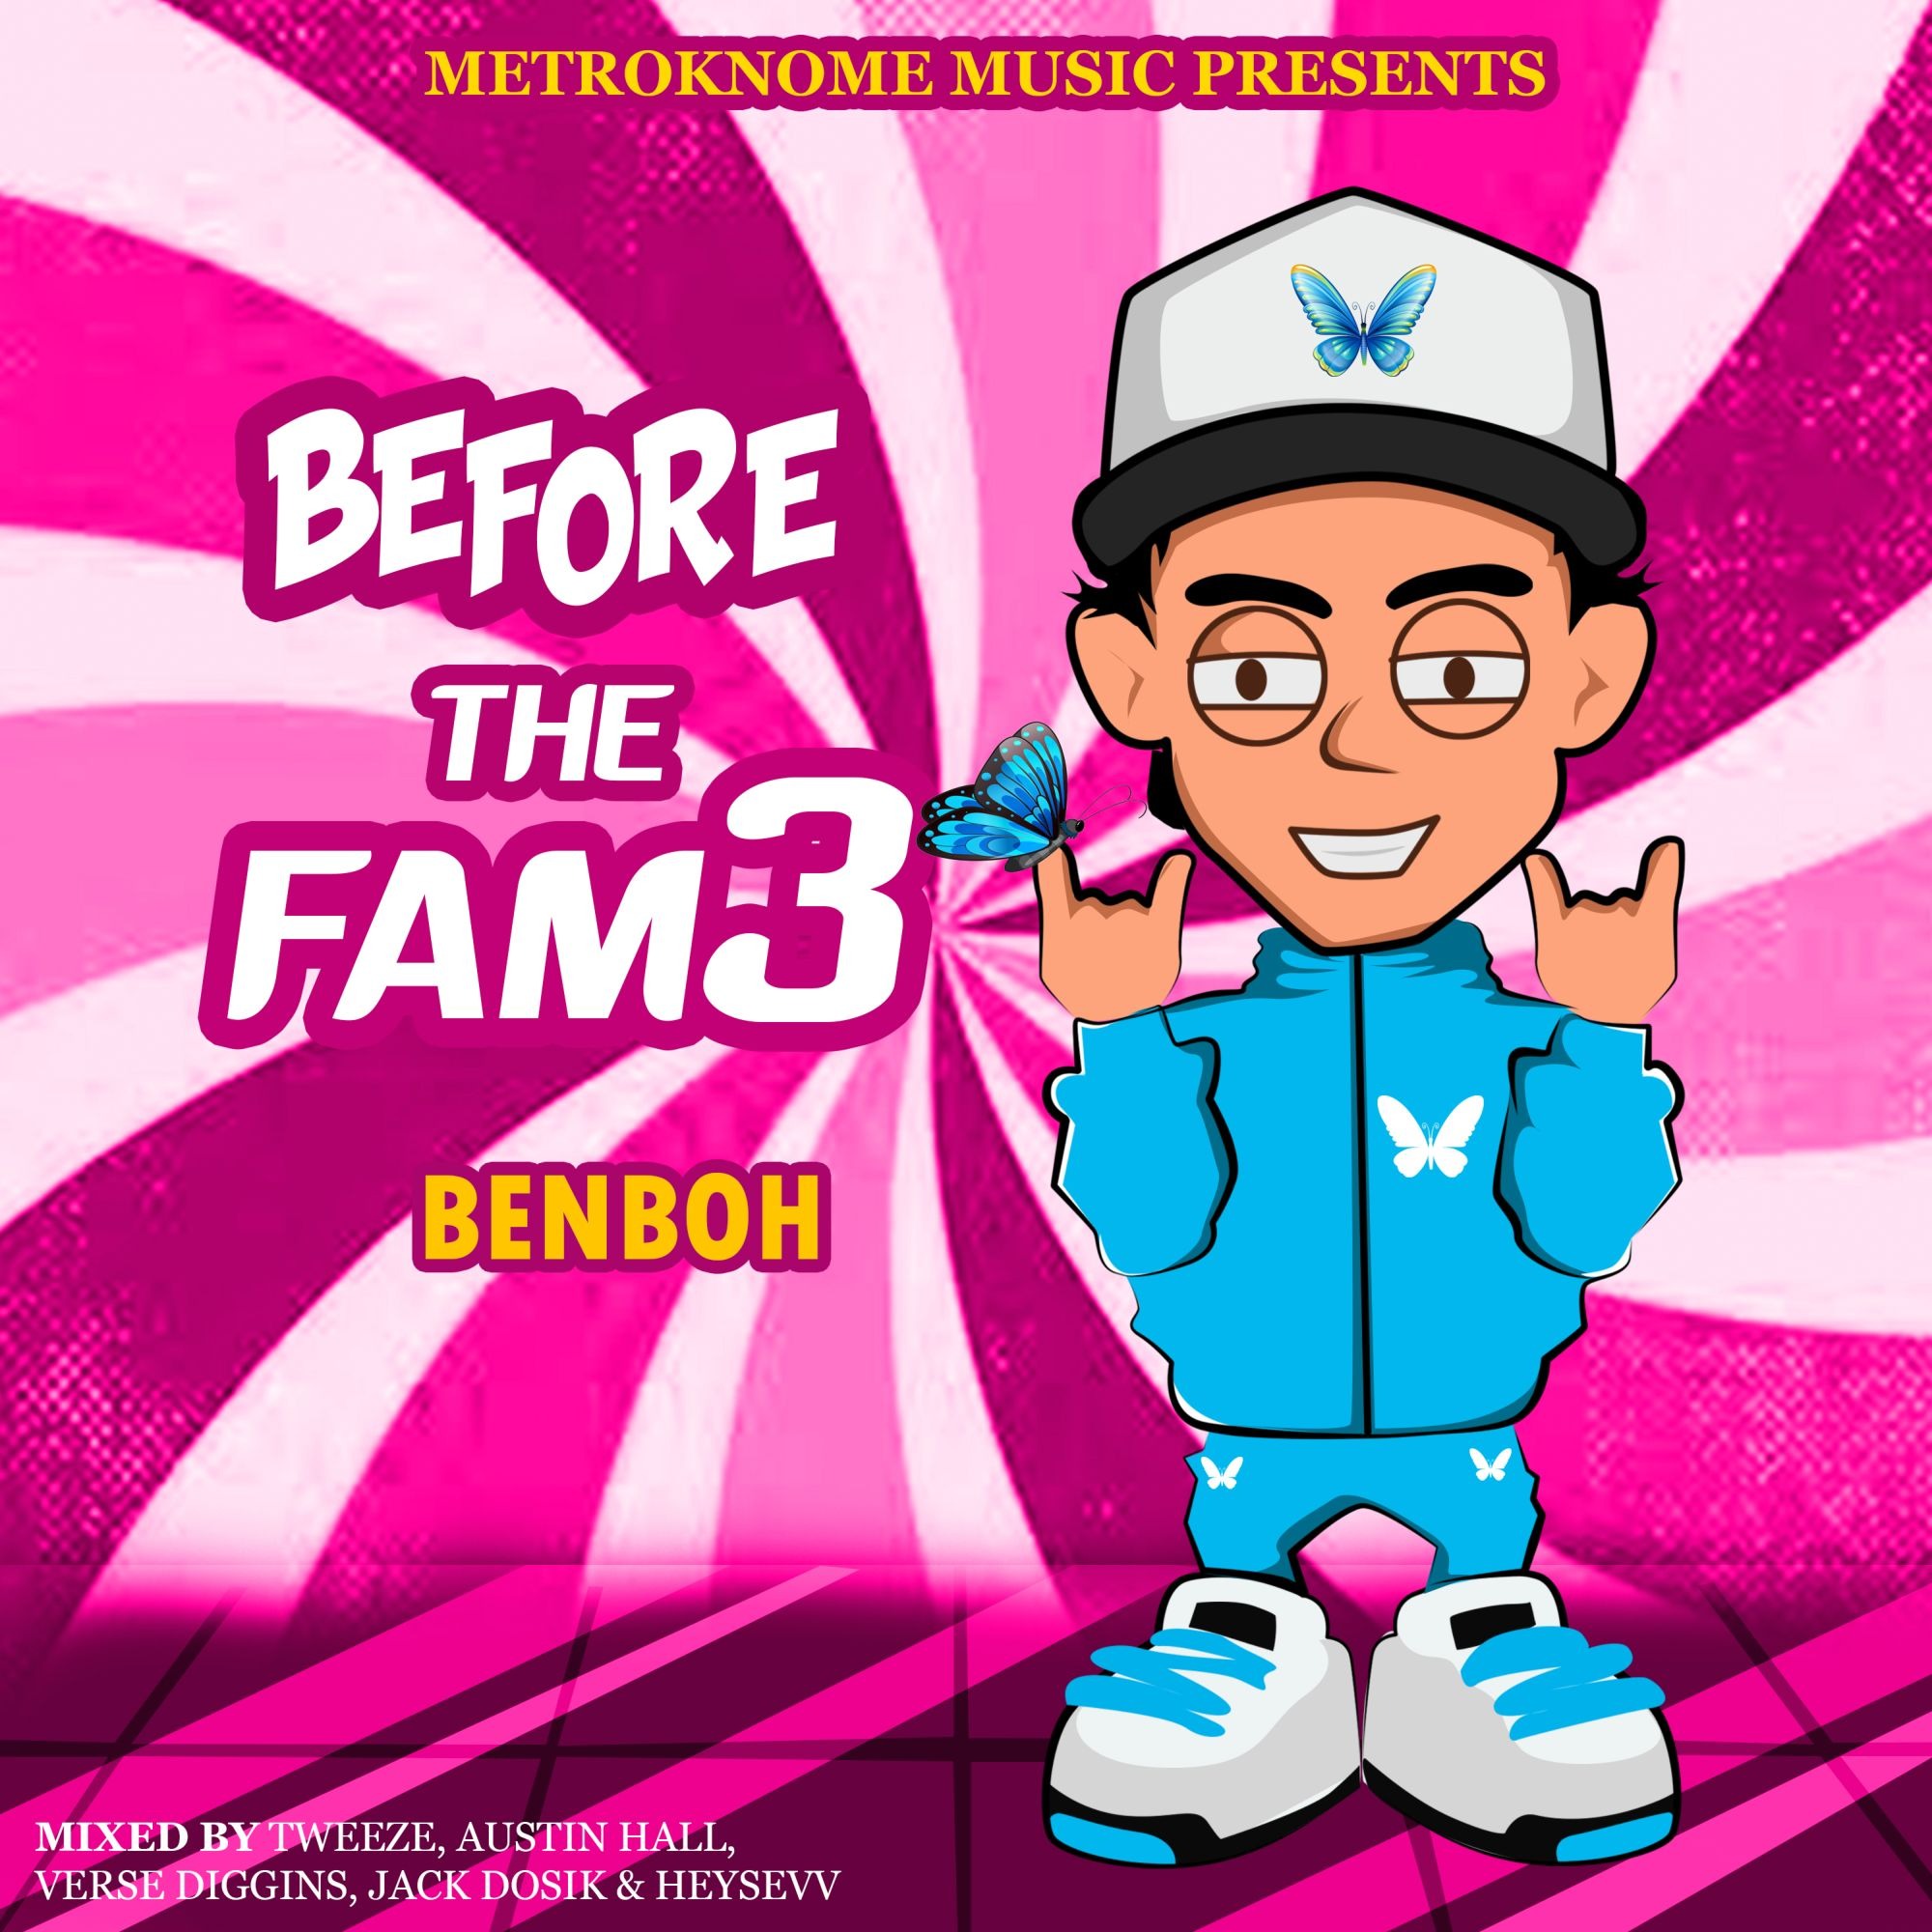 Rising Multi-Genre Music Artist is Set For Release - Gifted Singer-songwriter BenBoh Drops His New Alternative-Pop Album ‘BEFORE THE FAME 3’